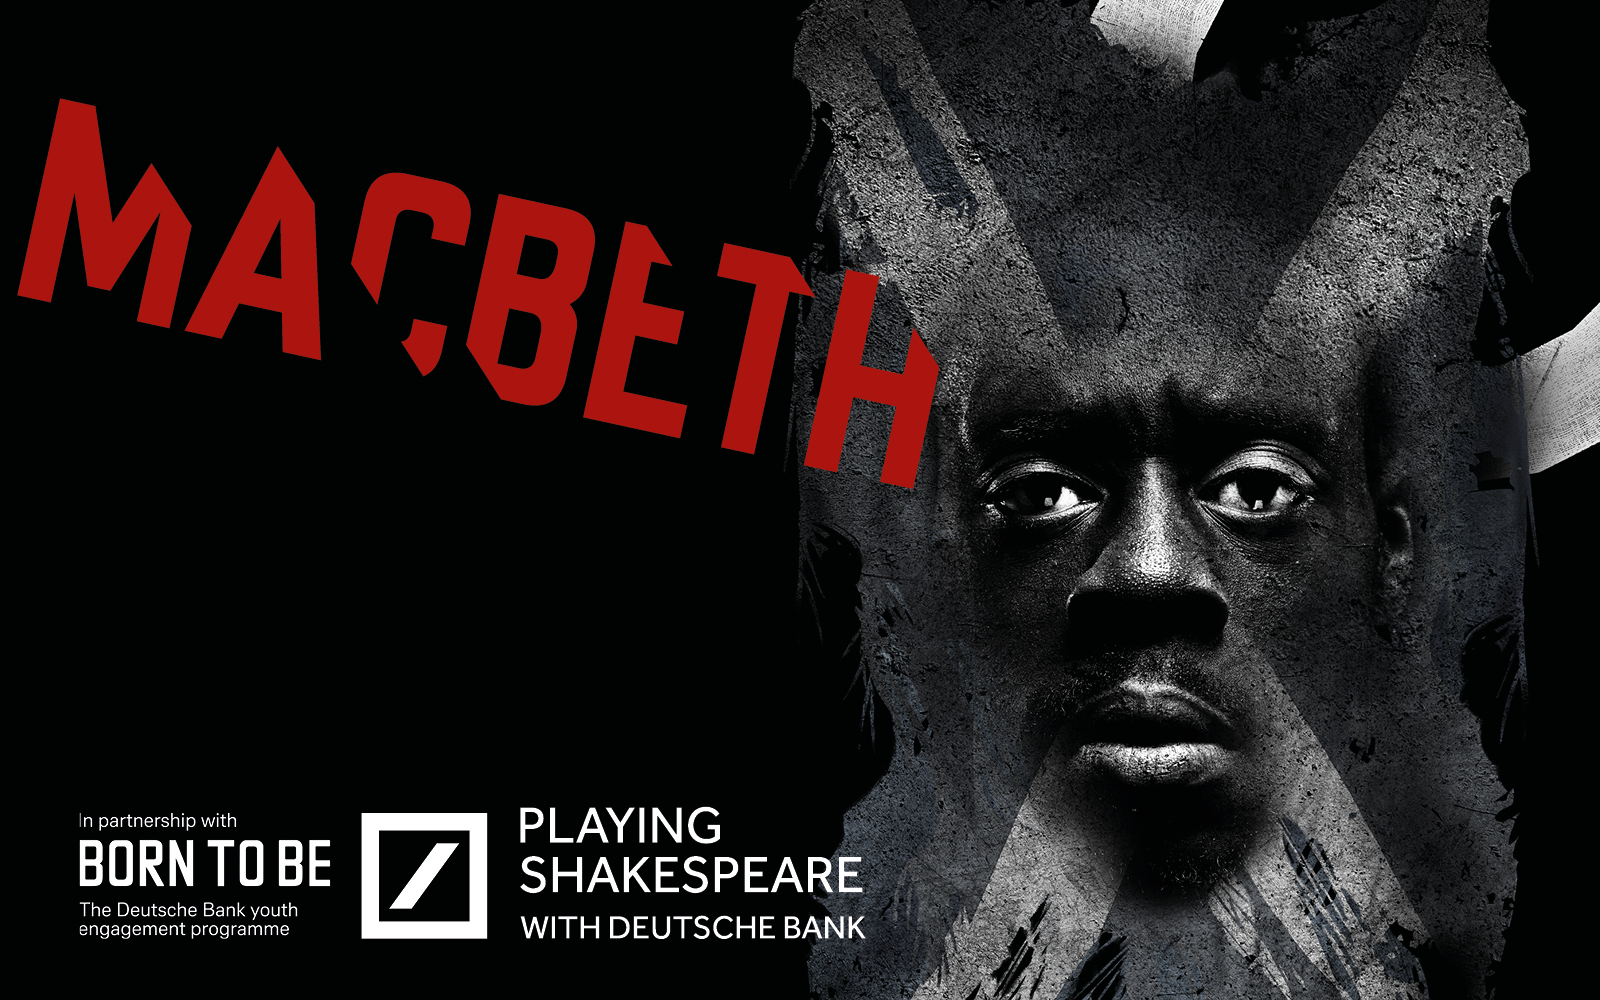 A graphic image of a man's face and the words Macbeth